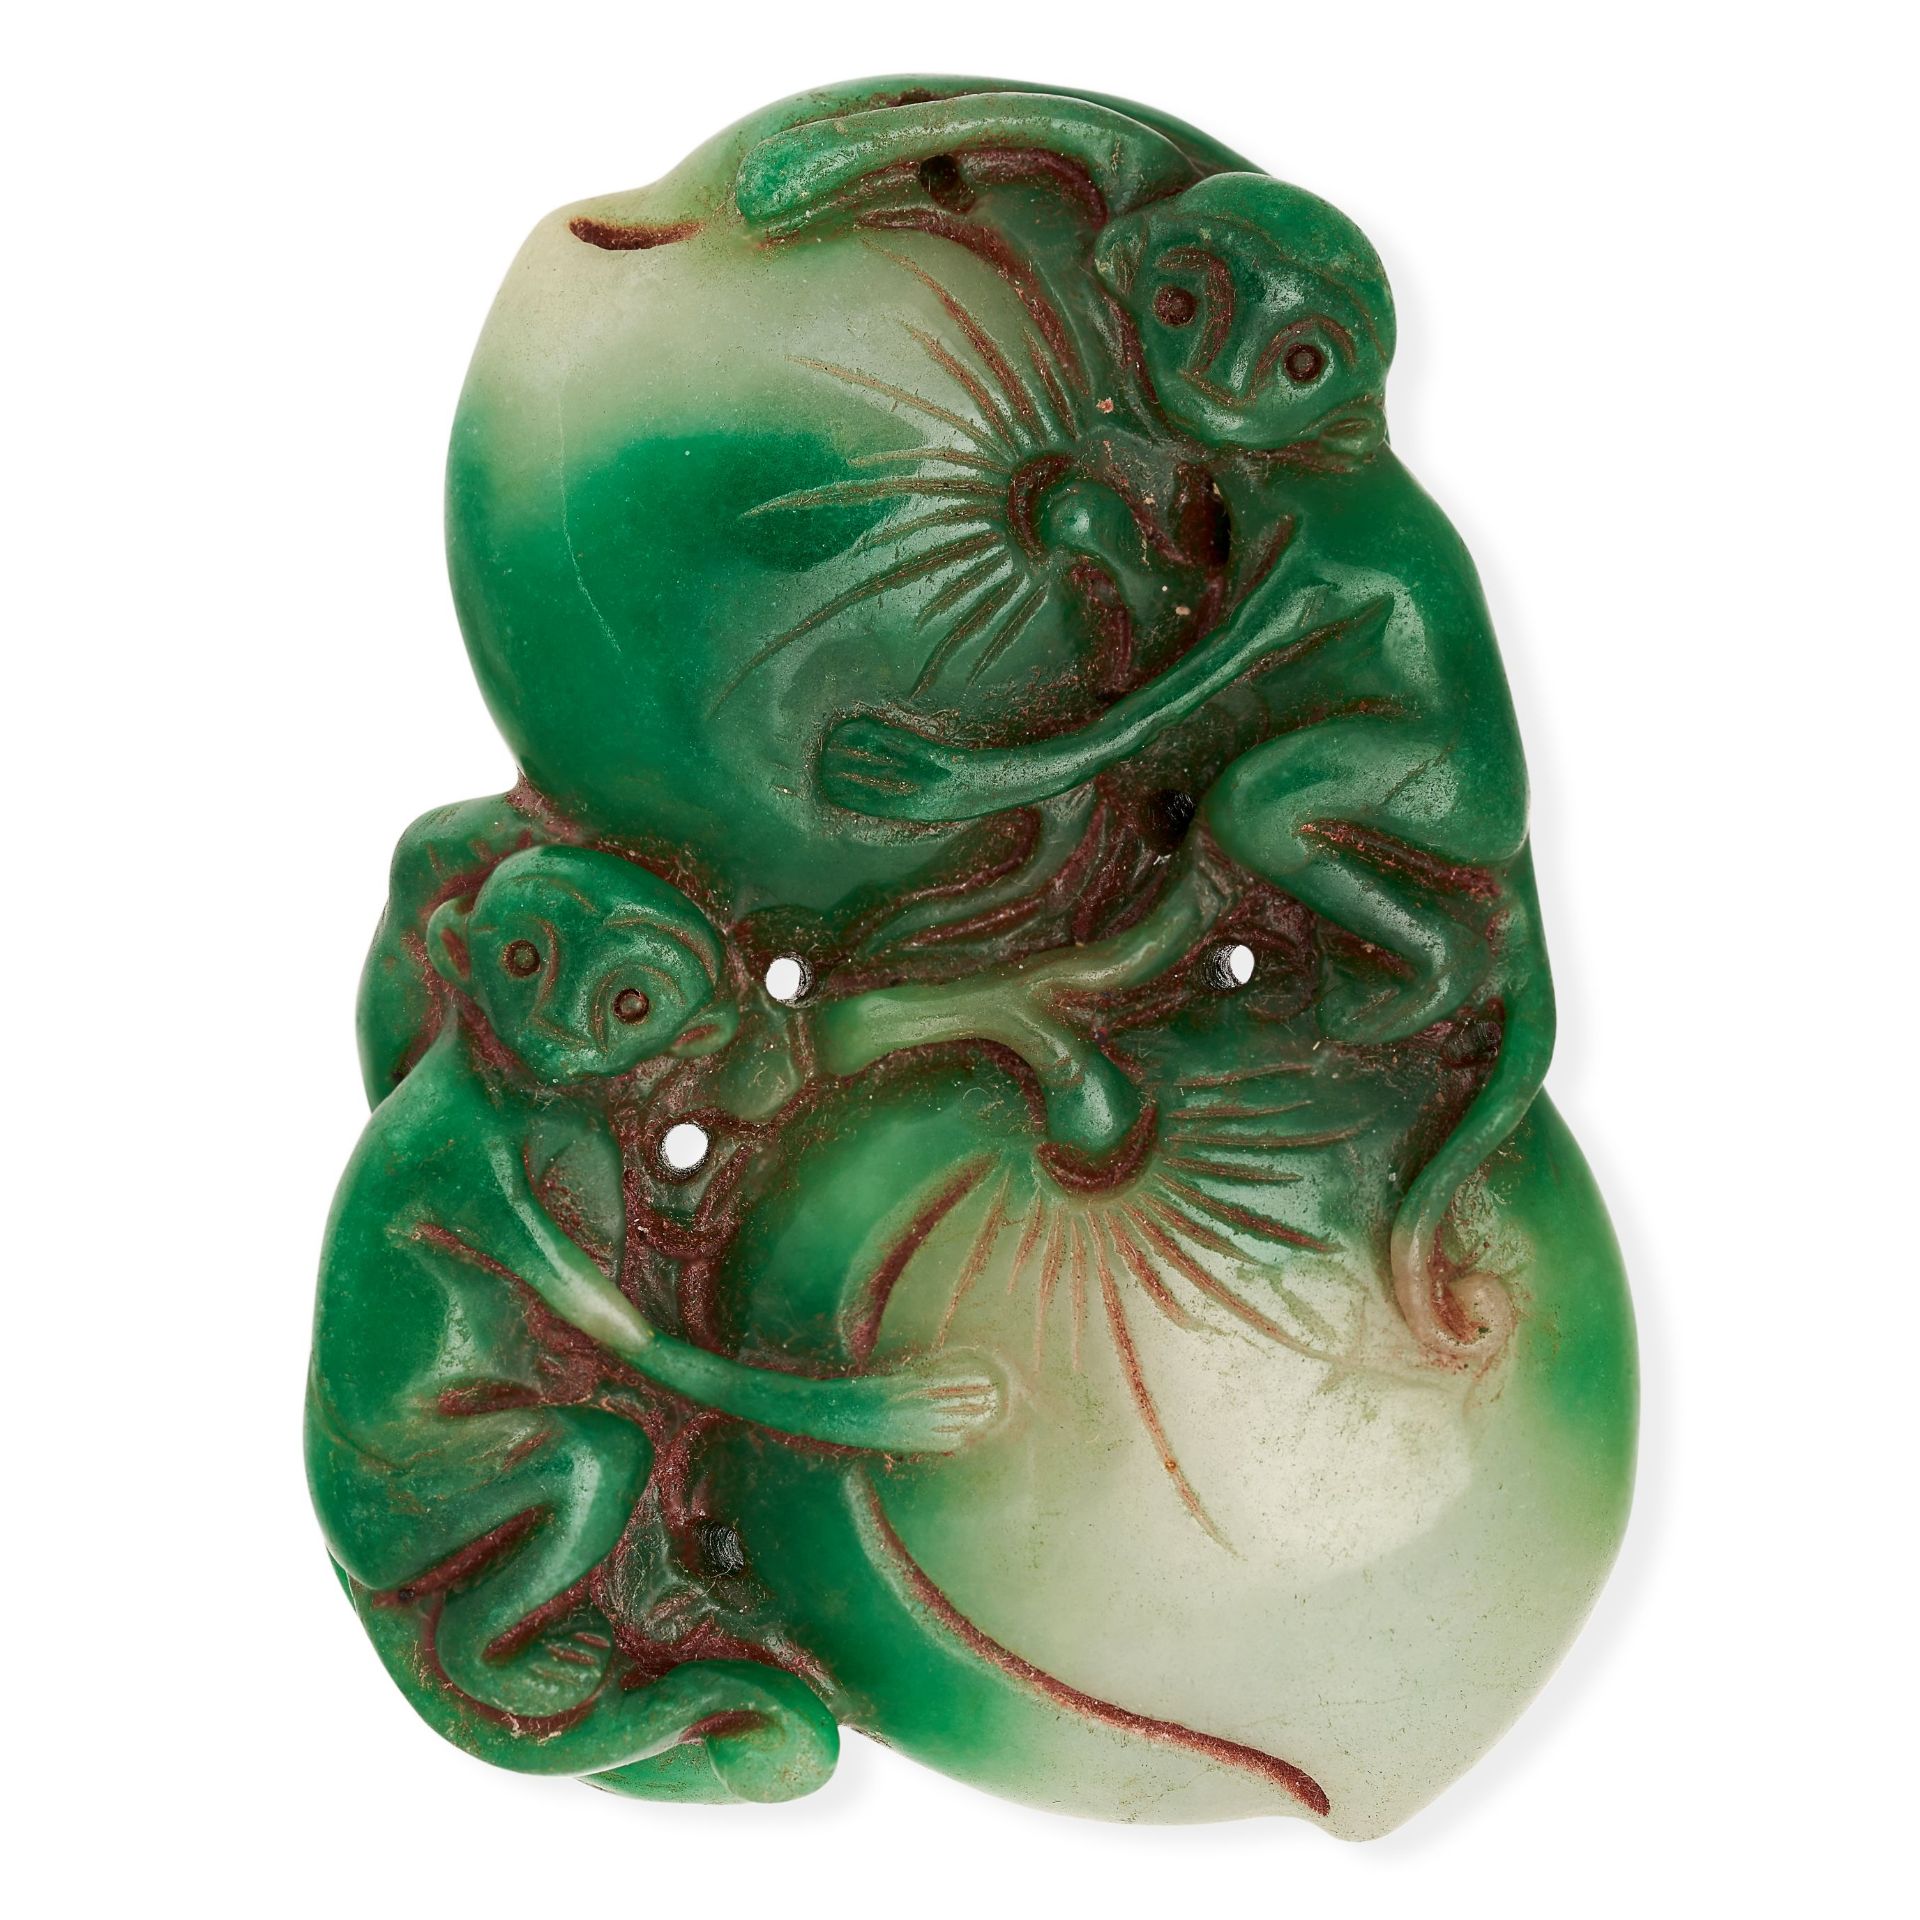 NO RESERVE - A CARVED JADEITE JADE PLAQUE carved in the Chinese style depicting two monkeys climbing